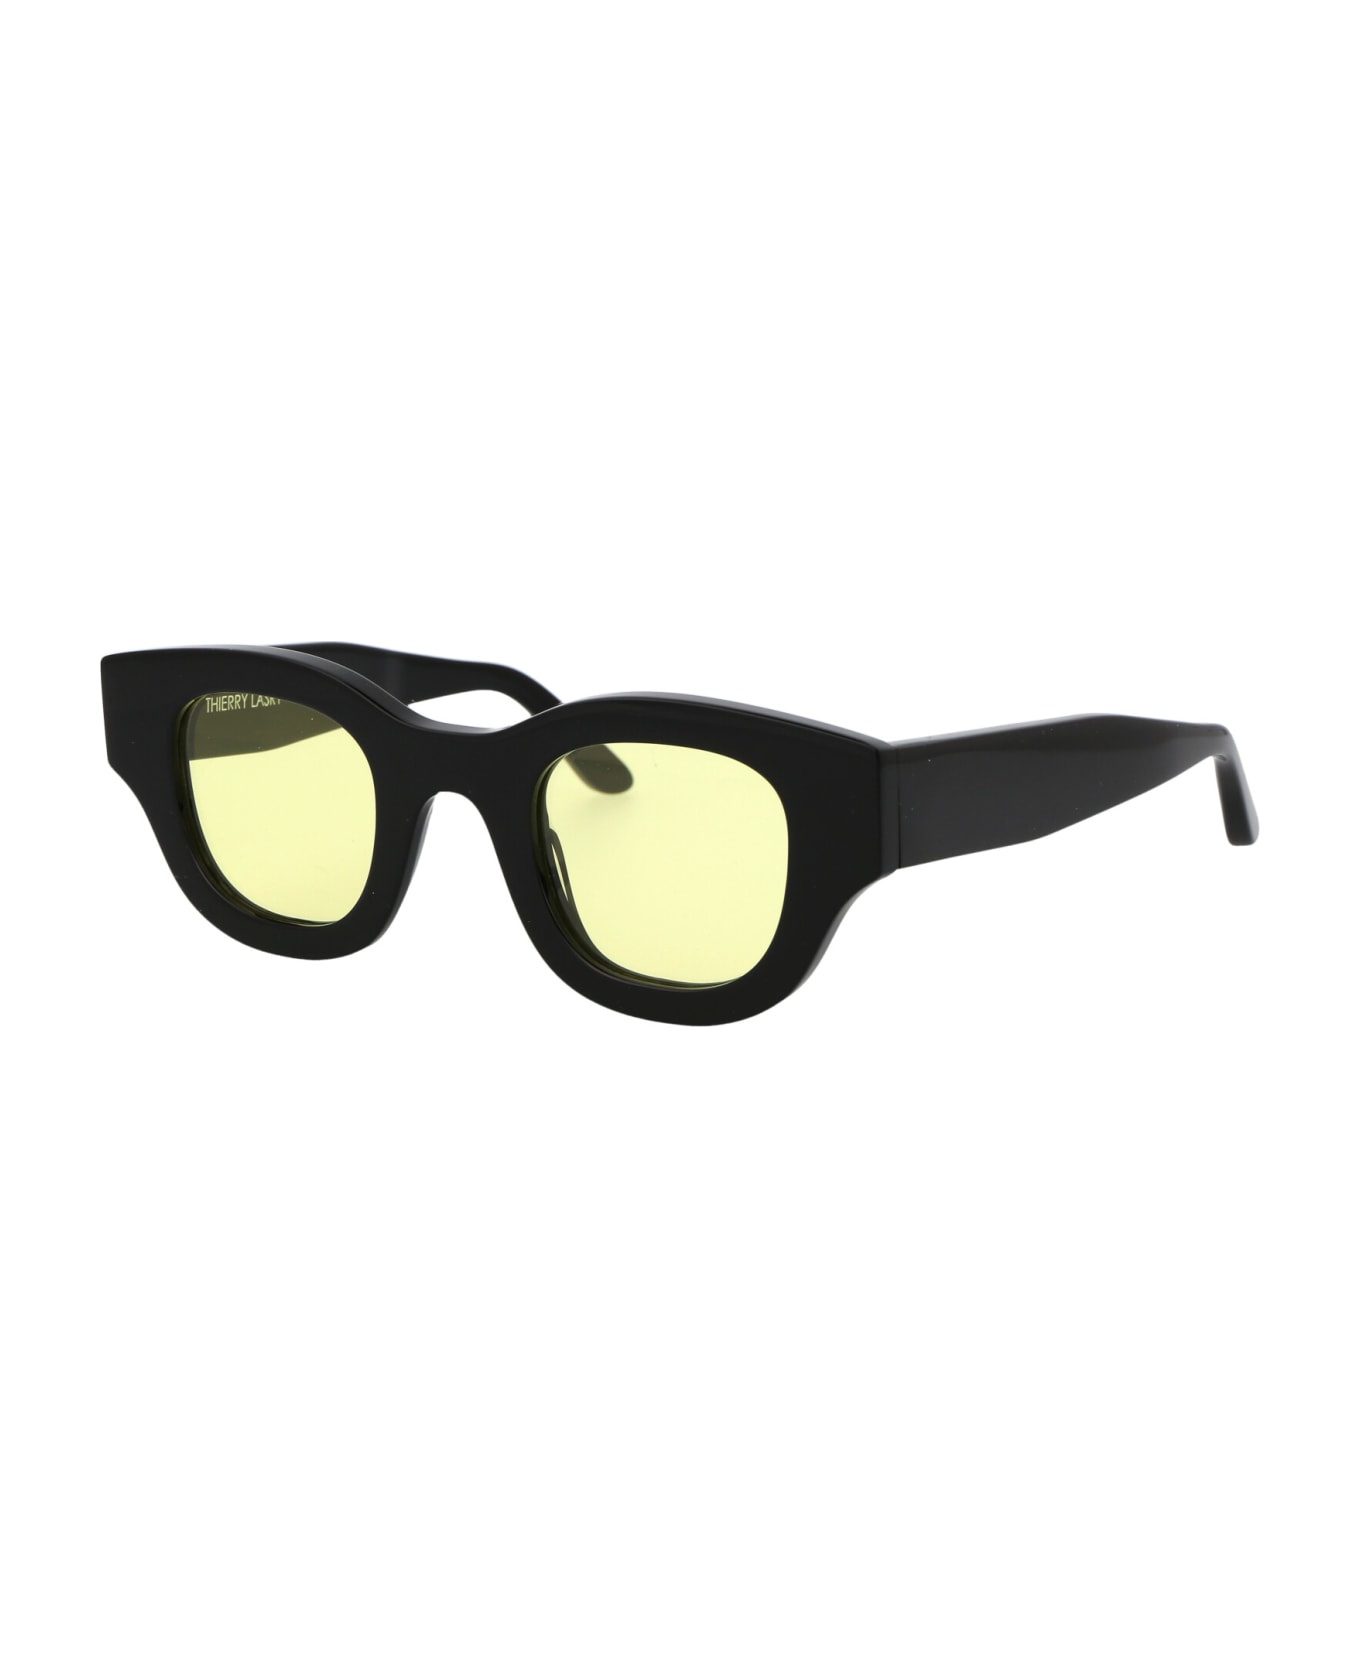 Thierry Lasry Autocracy Sunglasses - 101 YELLOW